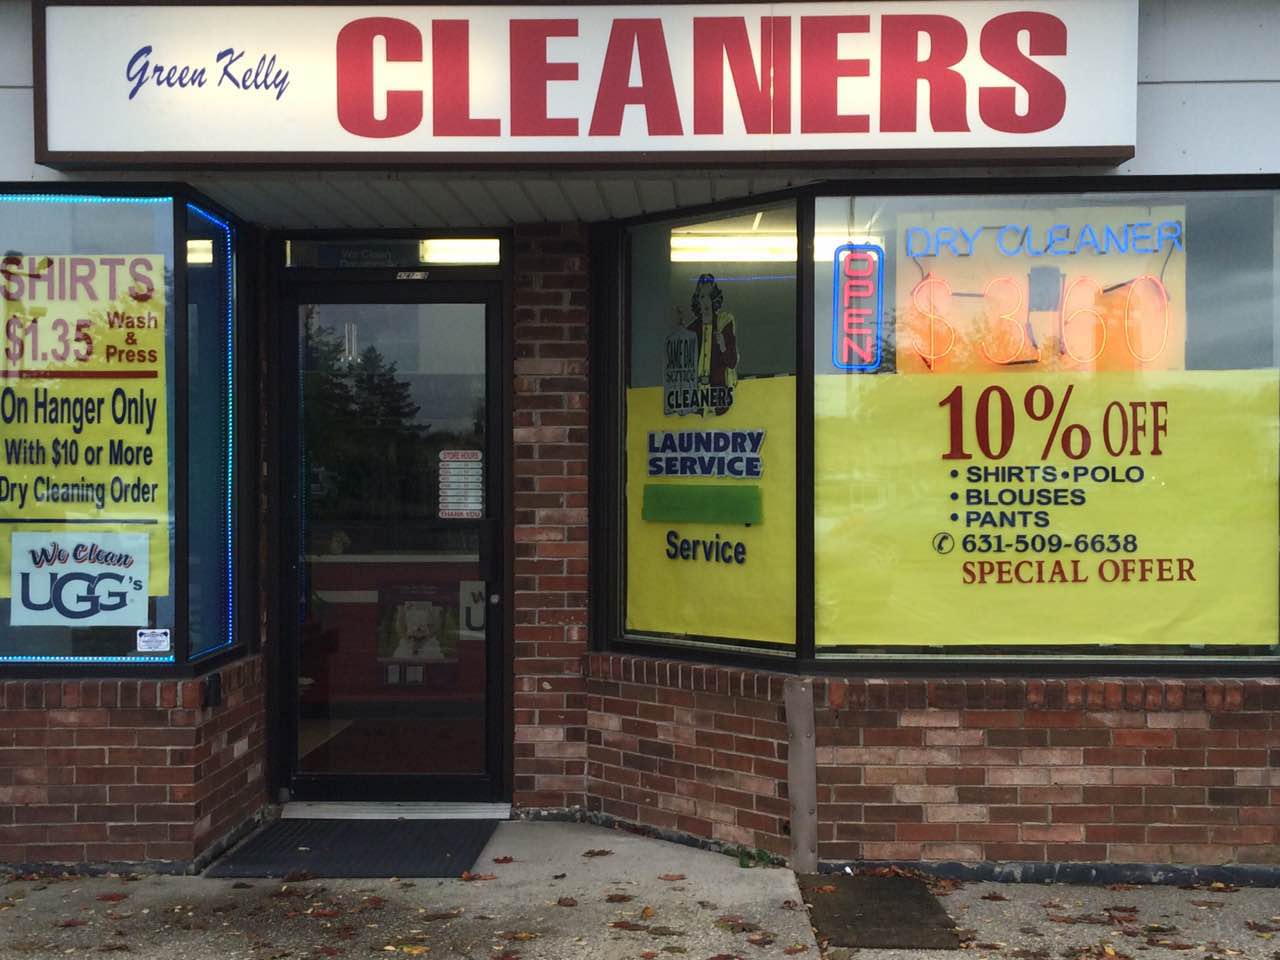 green kelly dry cleaner